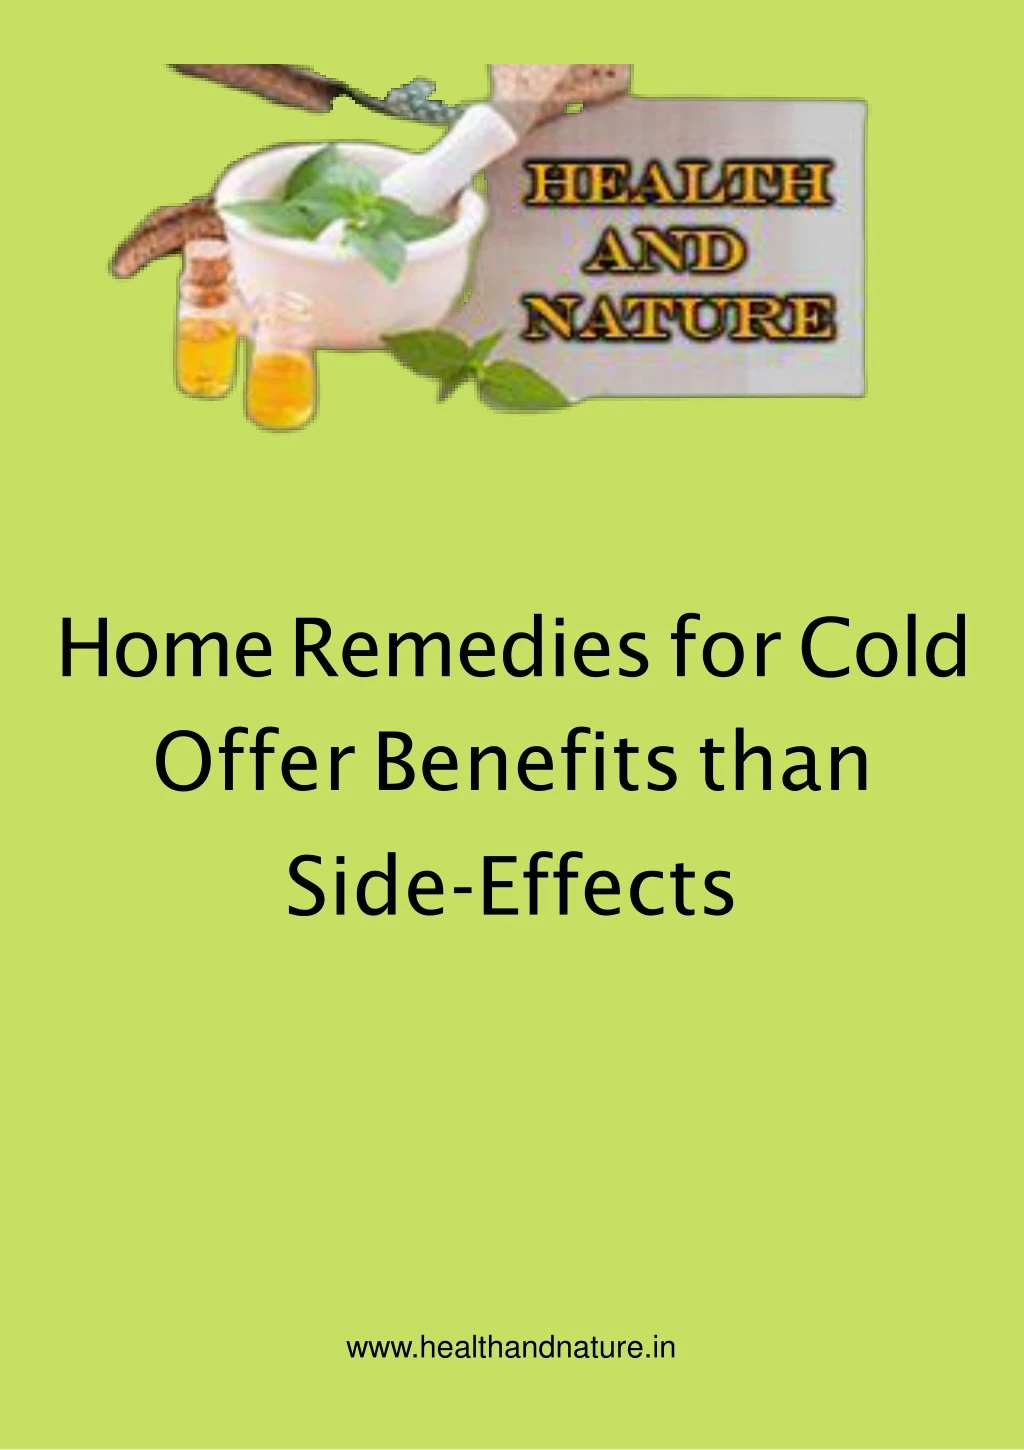 home remedies for cold offer benefits than side